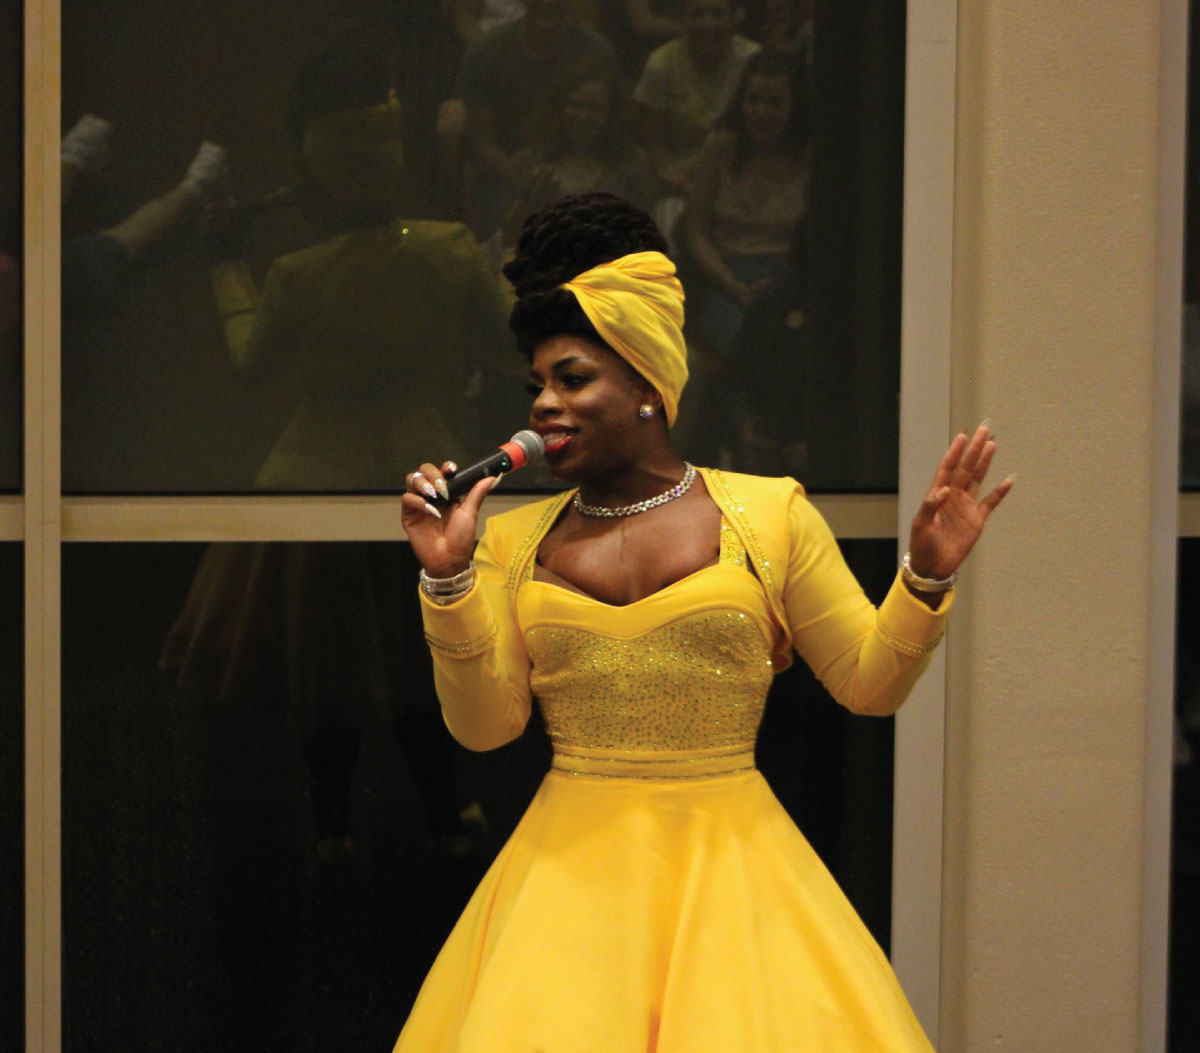 The drag queen Monet X Change hosting the NYU event 